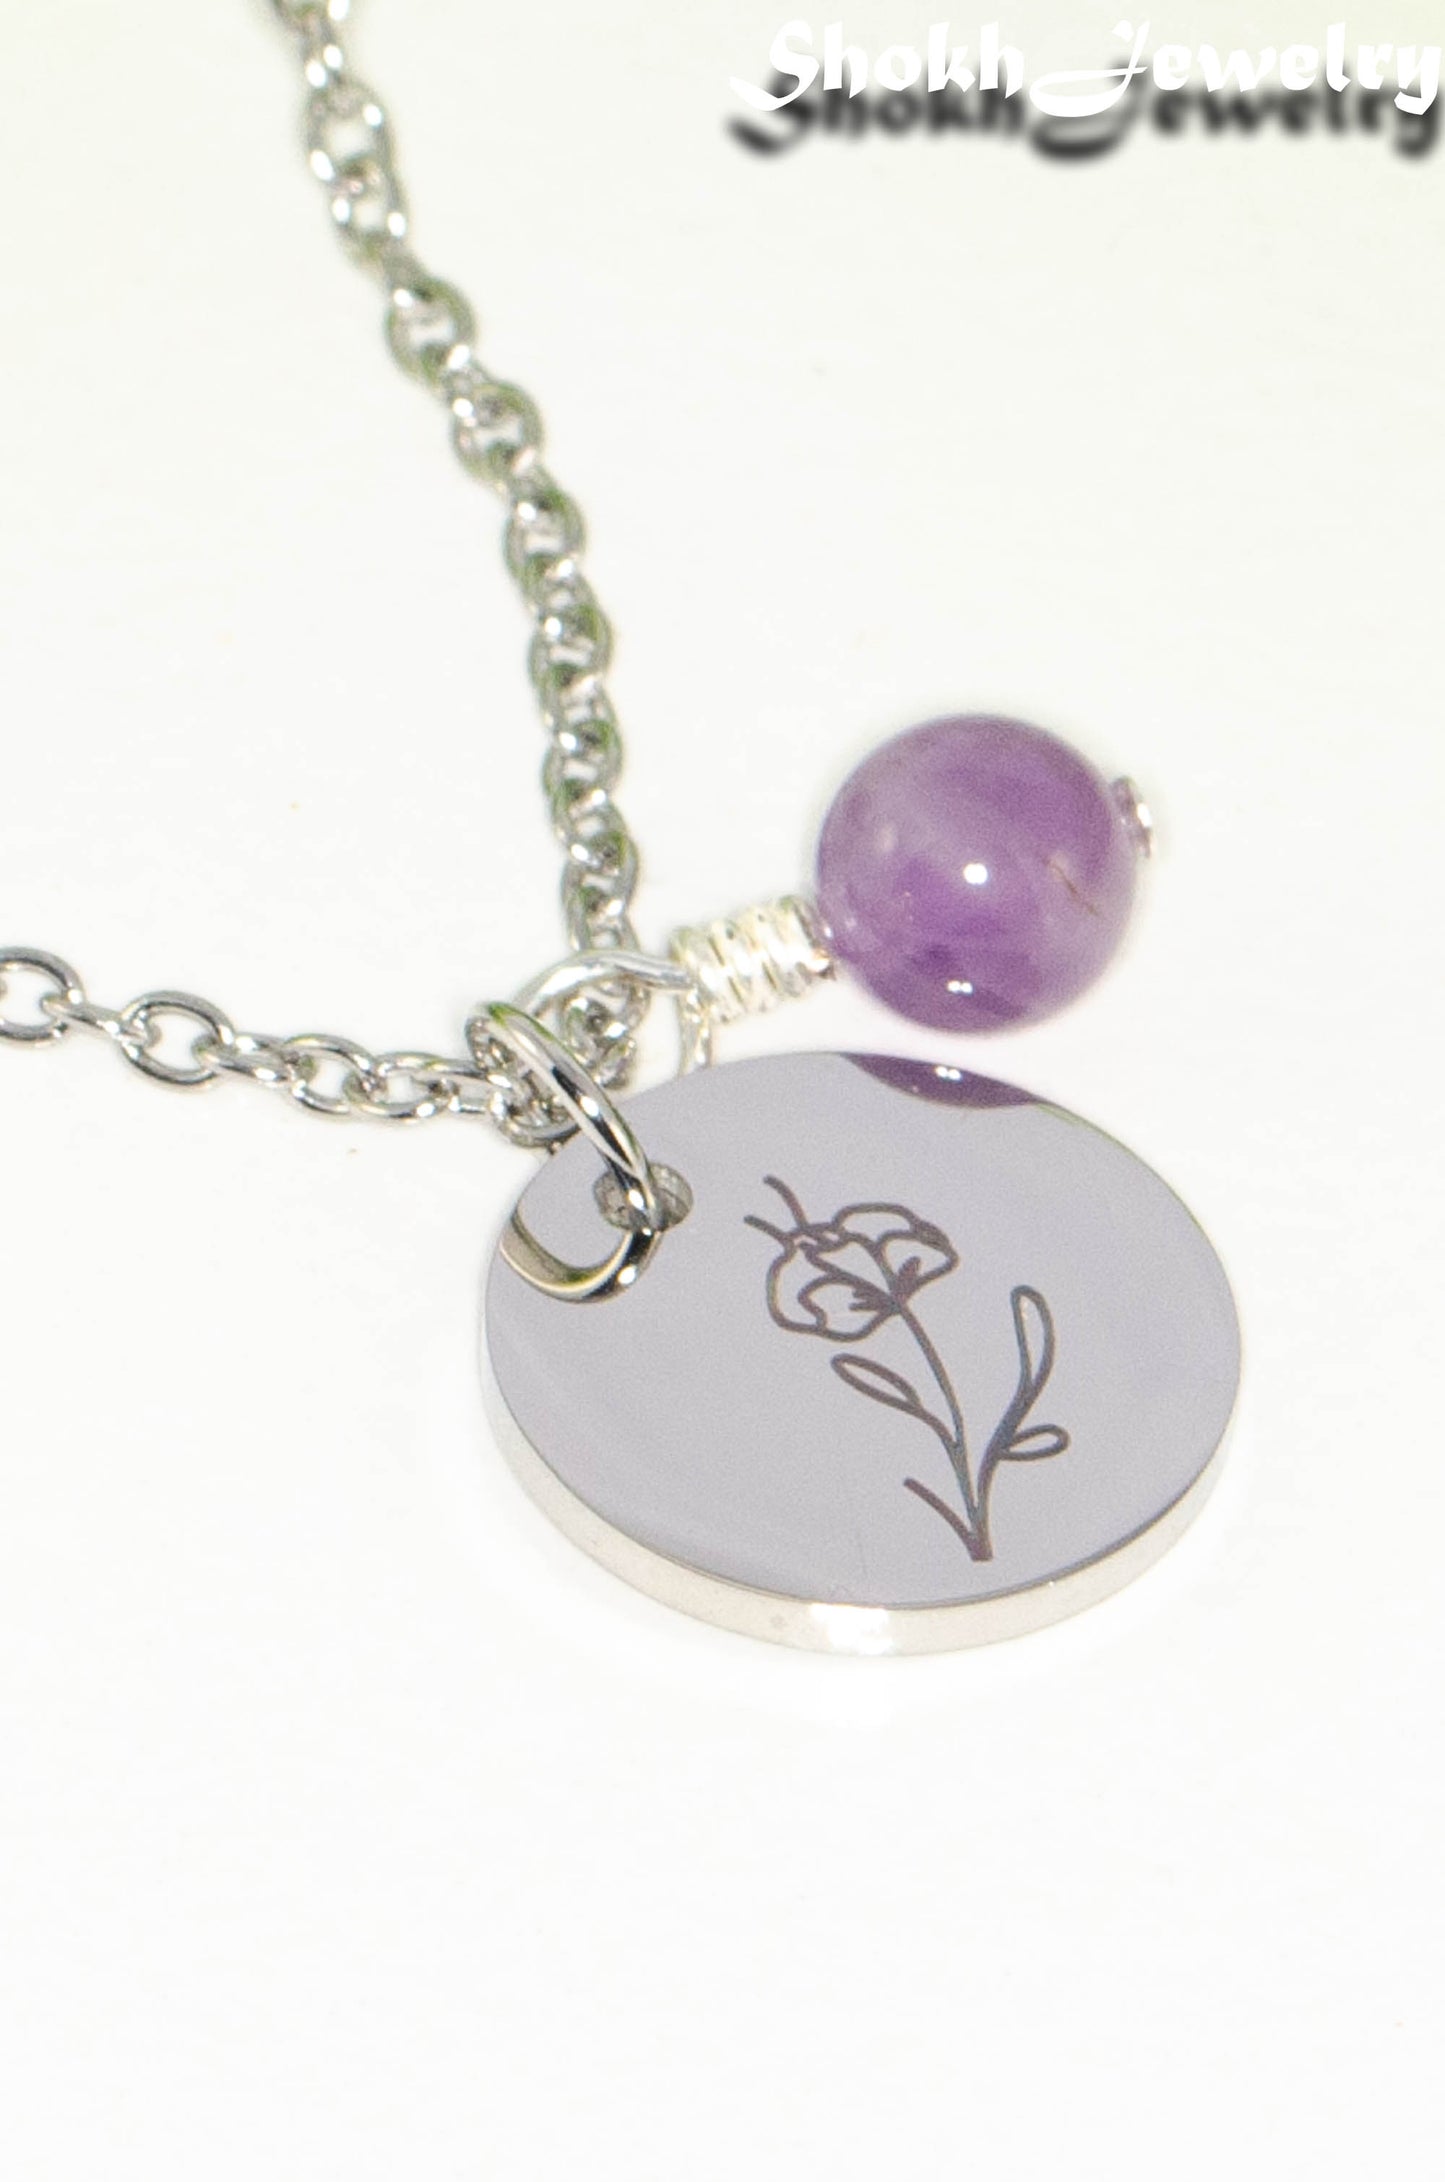 Close up of February Birth Flower Necklace with Amethyst Birthstone Pendant.